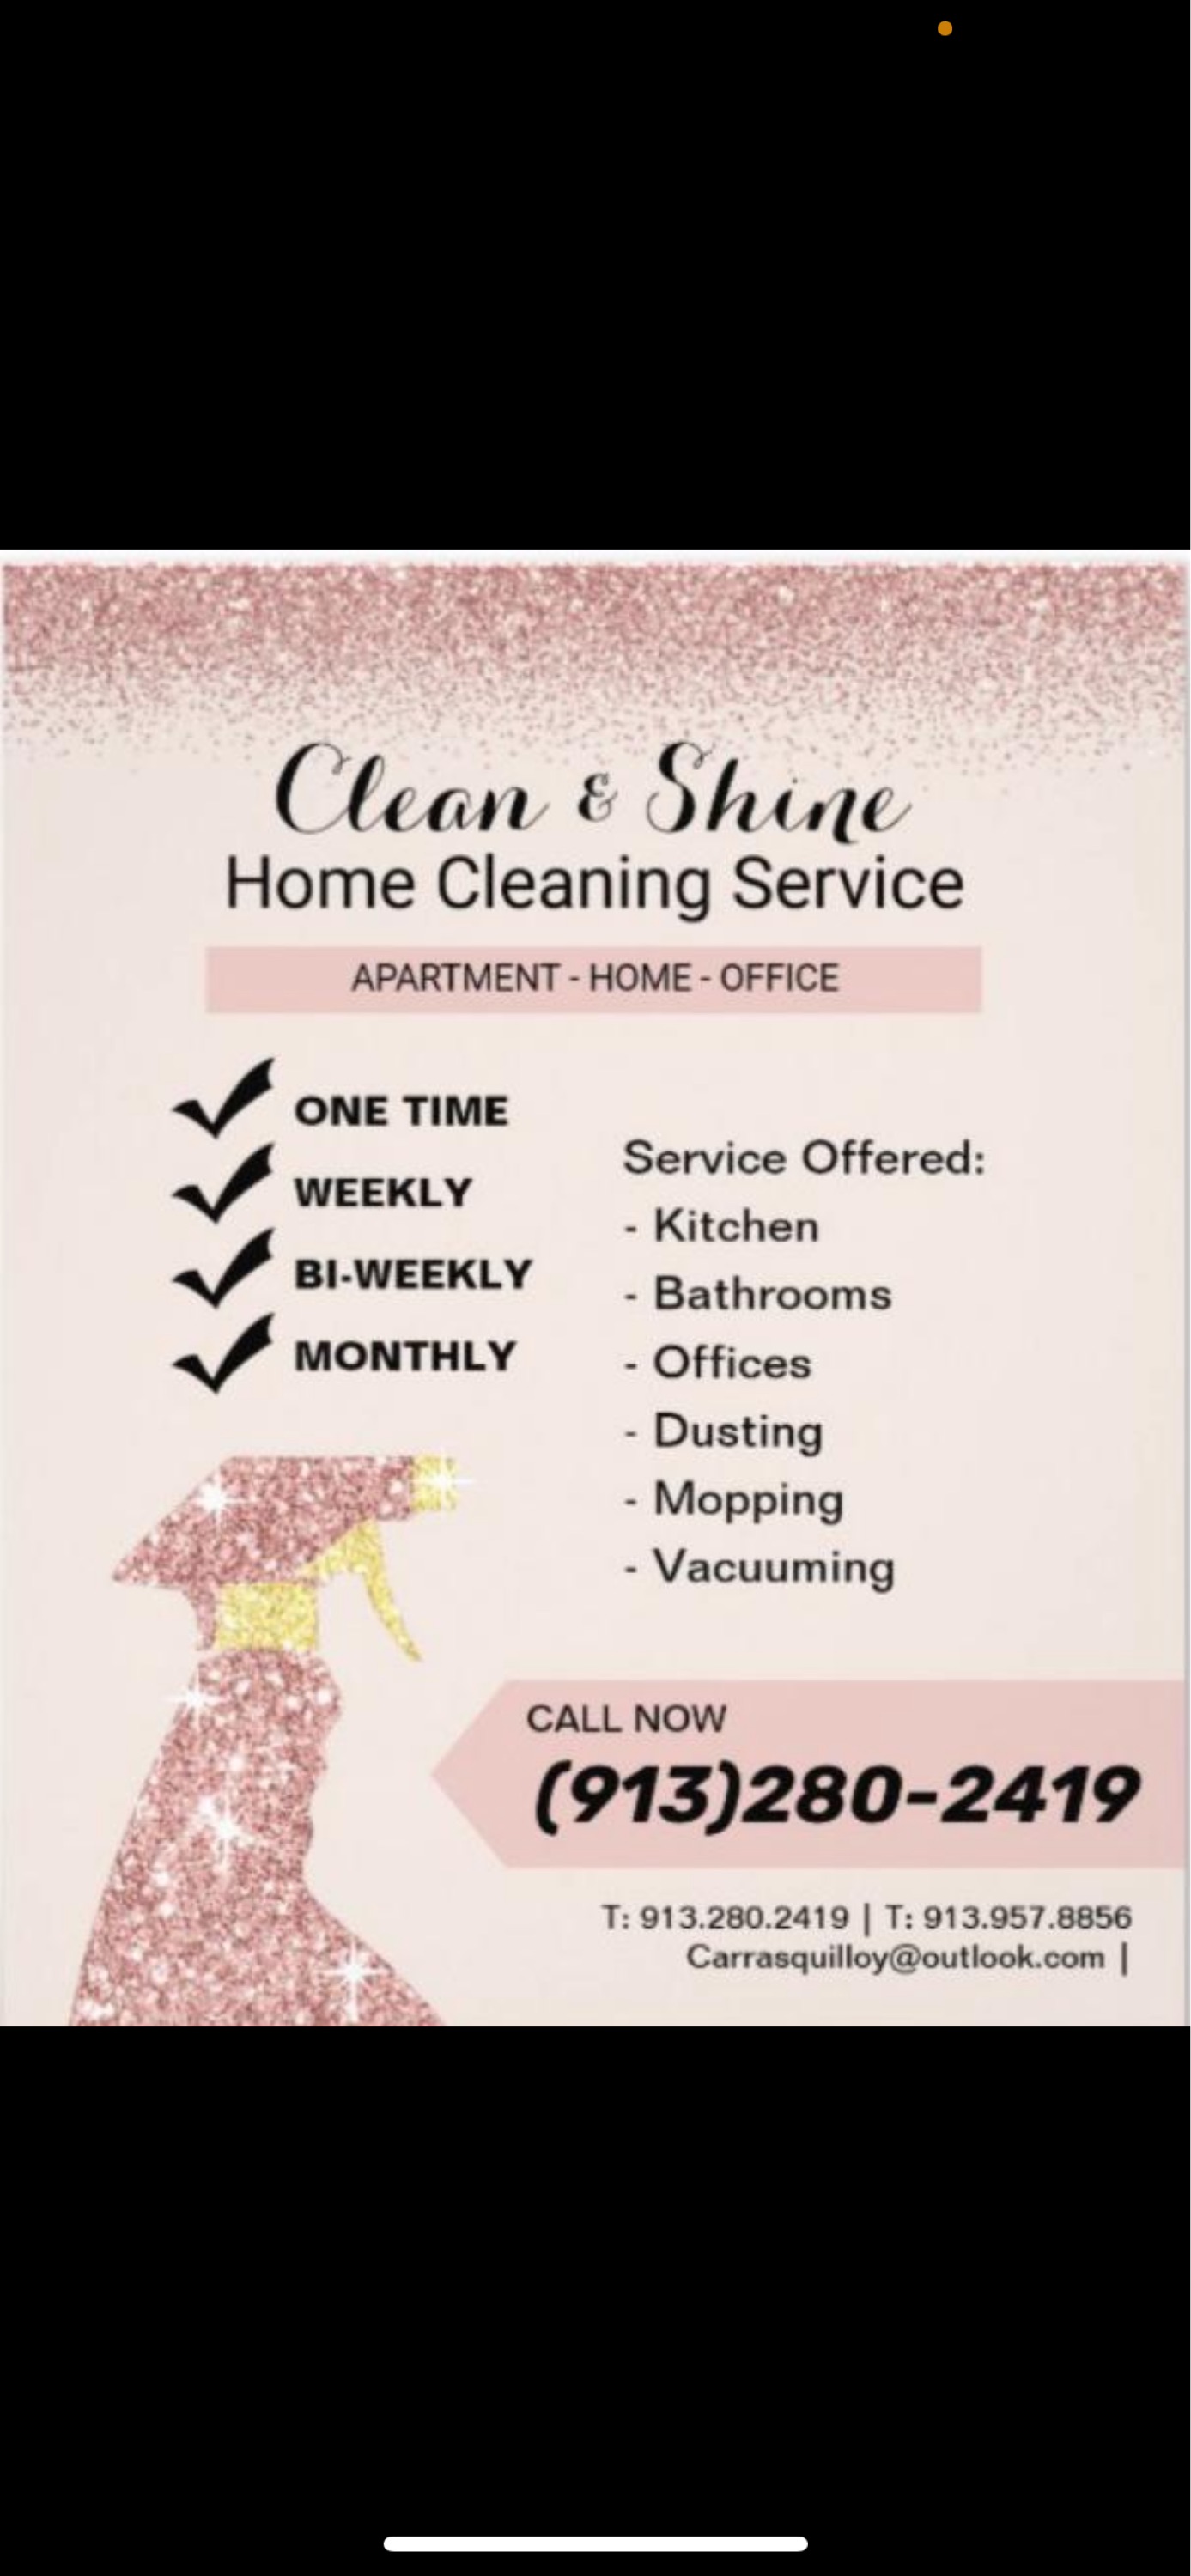 Clean & Shine Home Cleaning Service Logo